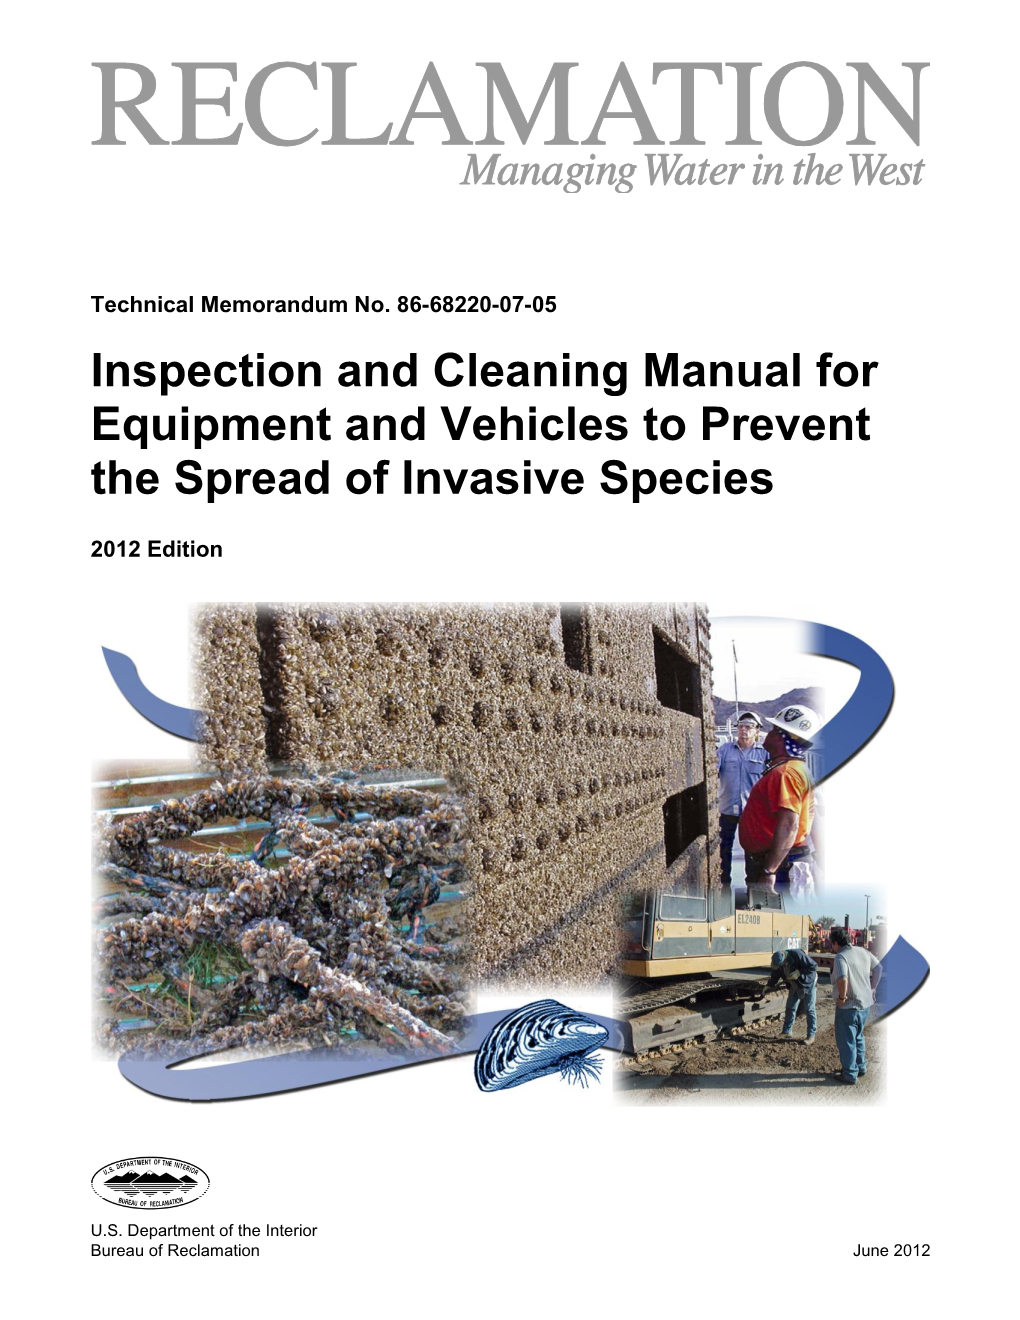 Equipment Inspection and Cleaning Manual